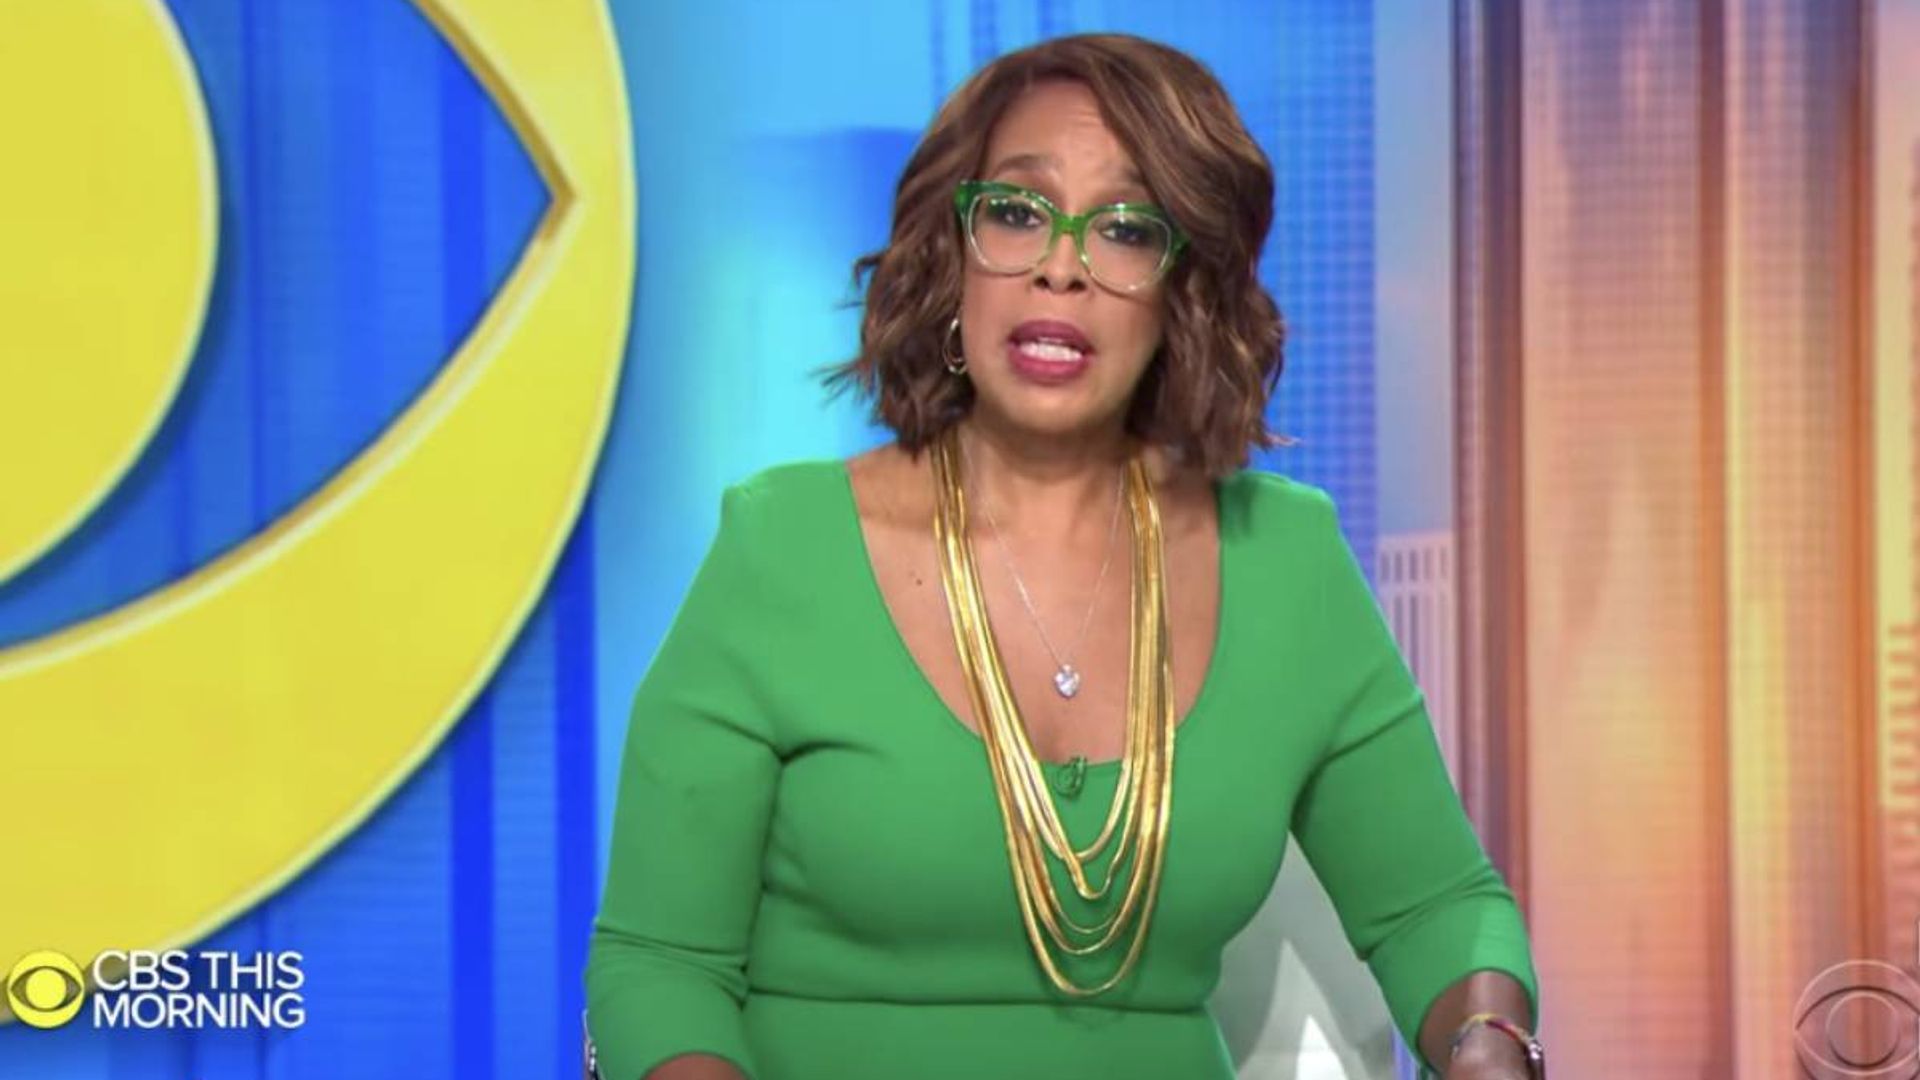 Gayle King stuns in figure-hugging dress - and it costs less than $35